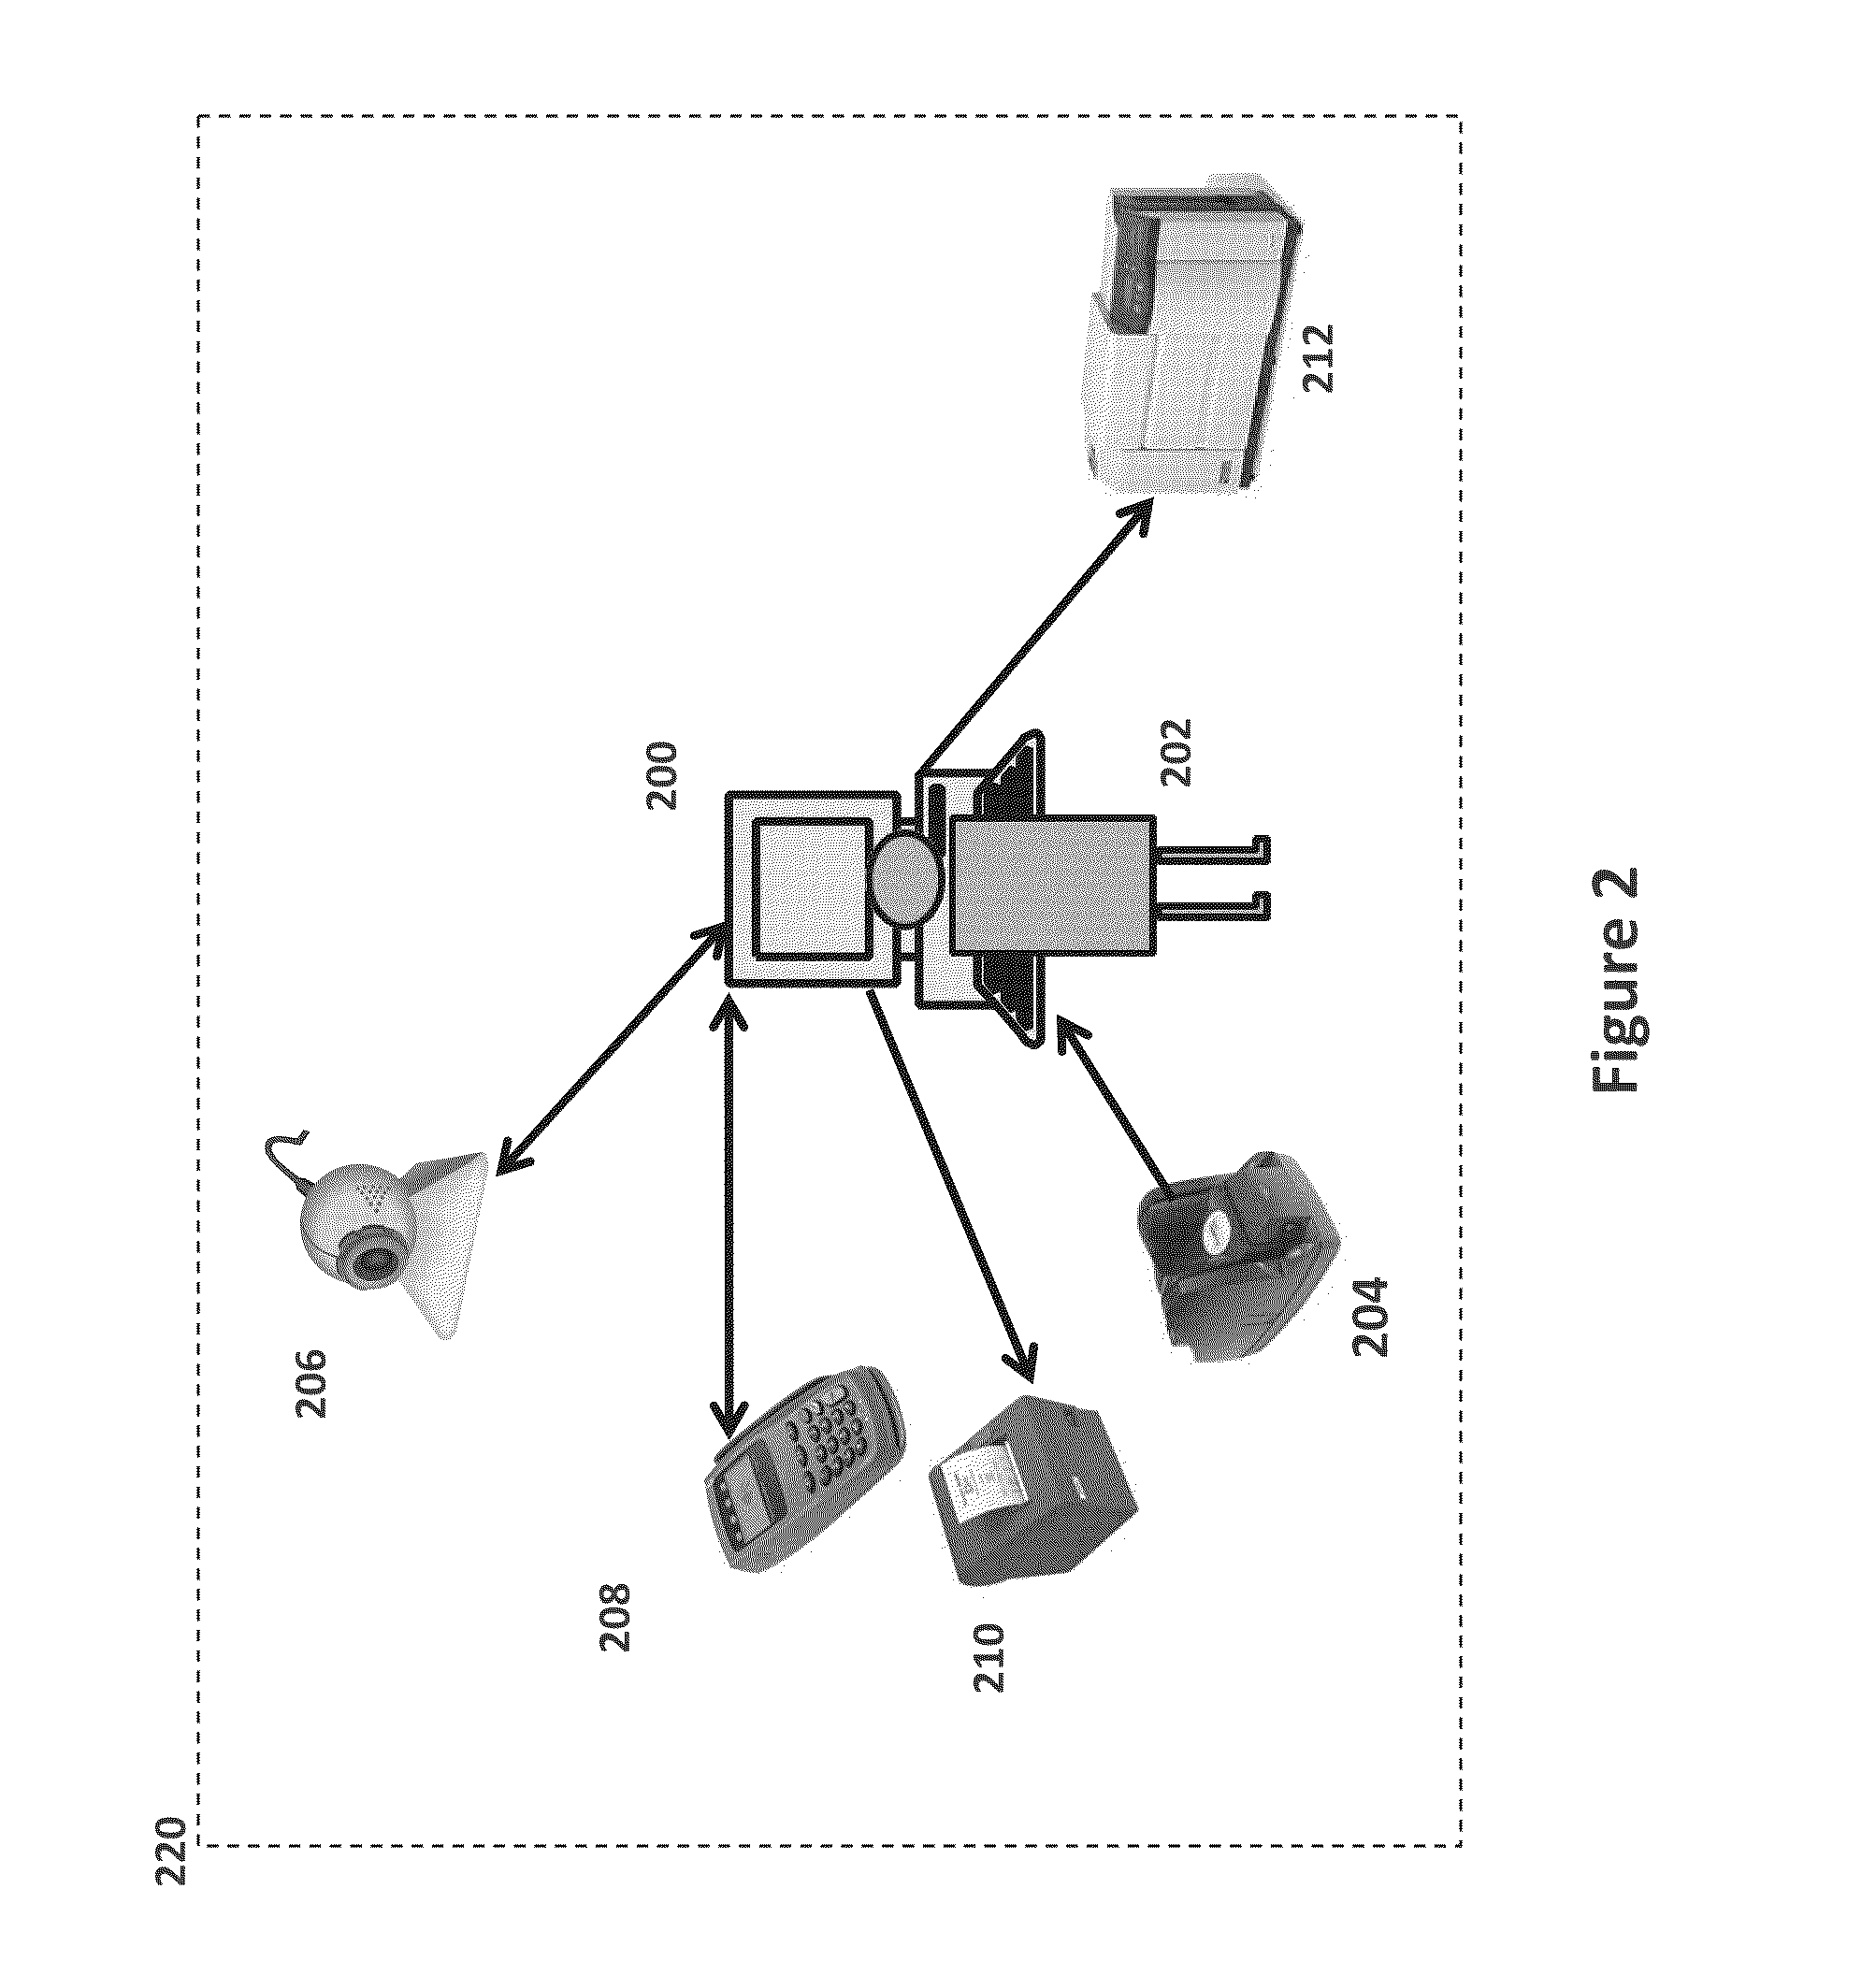 System and method for immediate issuance of an activated prepaid card with improved security measures